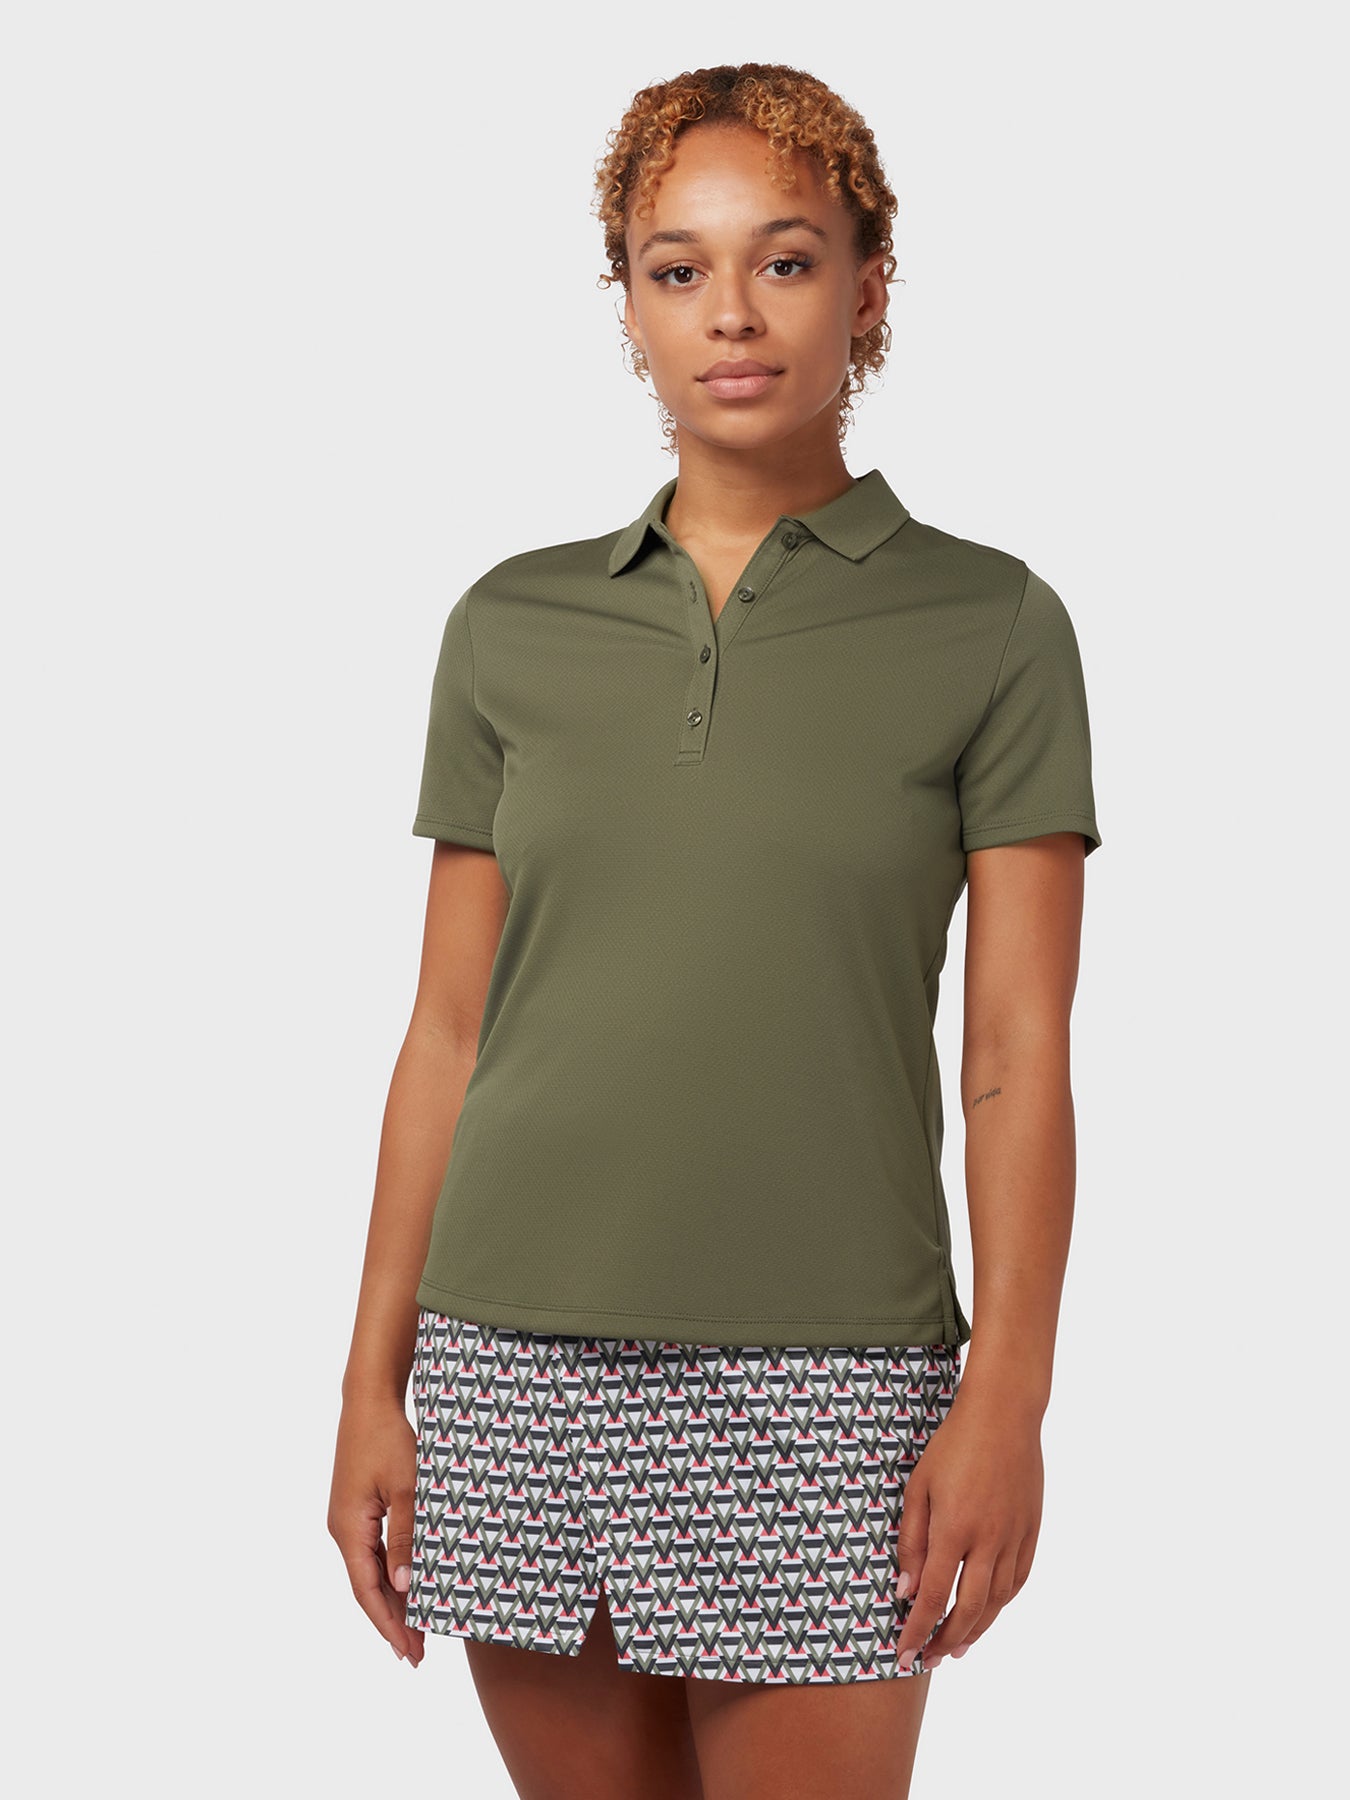 View Swing Tech Womens Polo In Industrial Green Industrial Green S information